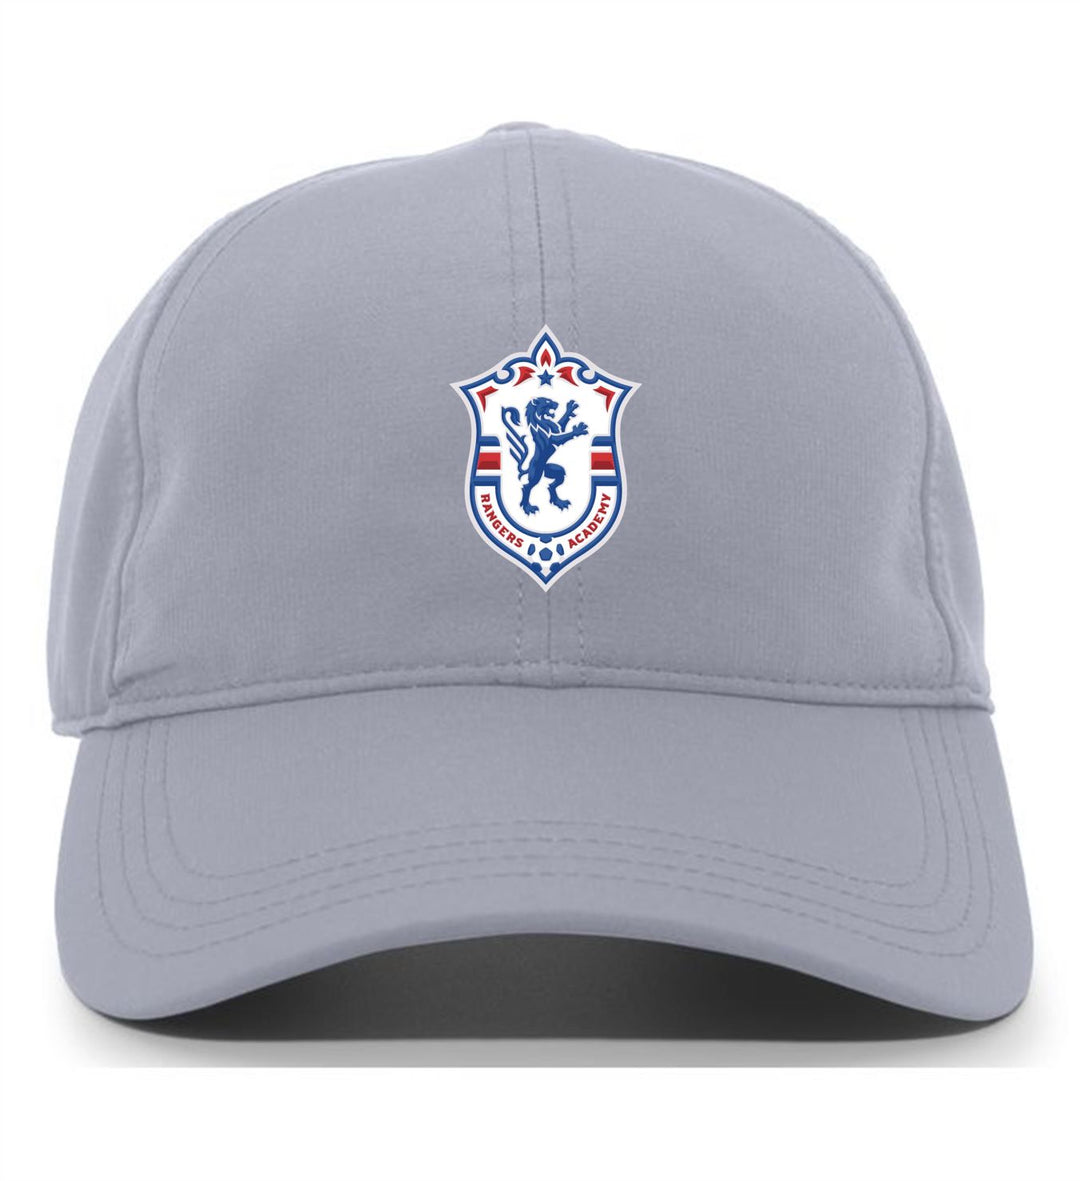 TCS GCR Adjustable Cap  SILVER FULL COLOR PATCH - Third Coast Soccer